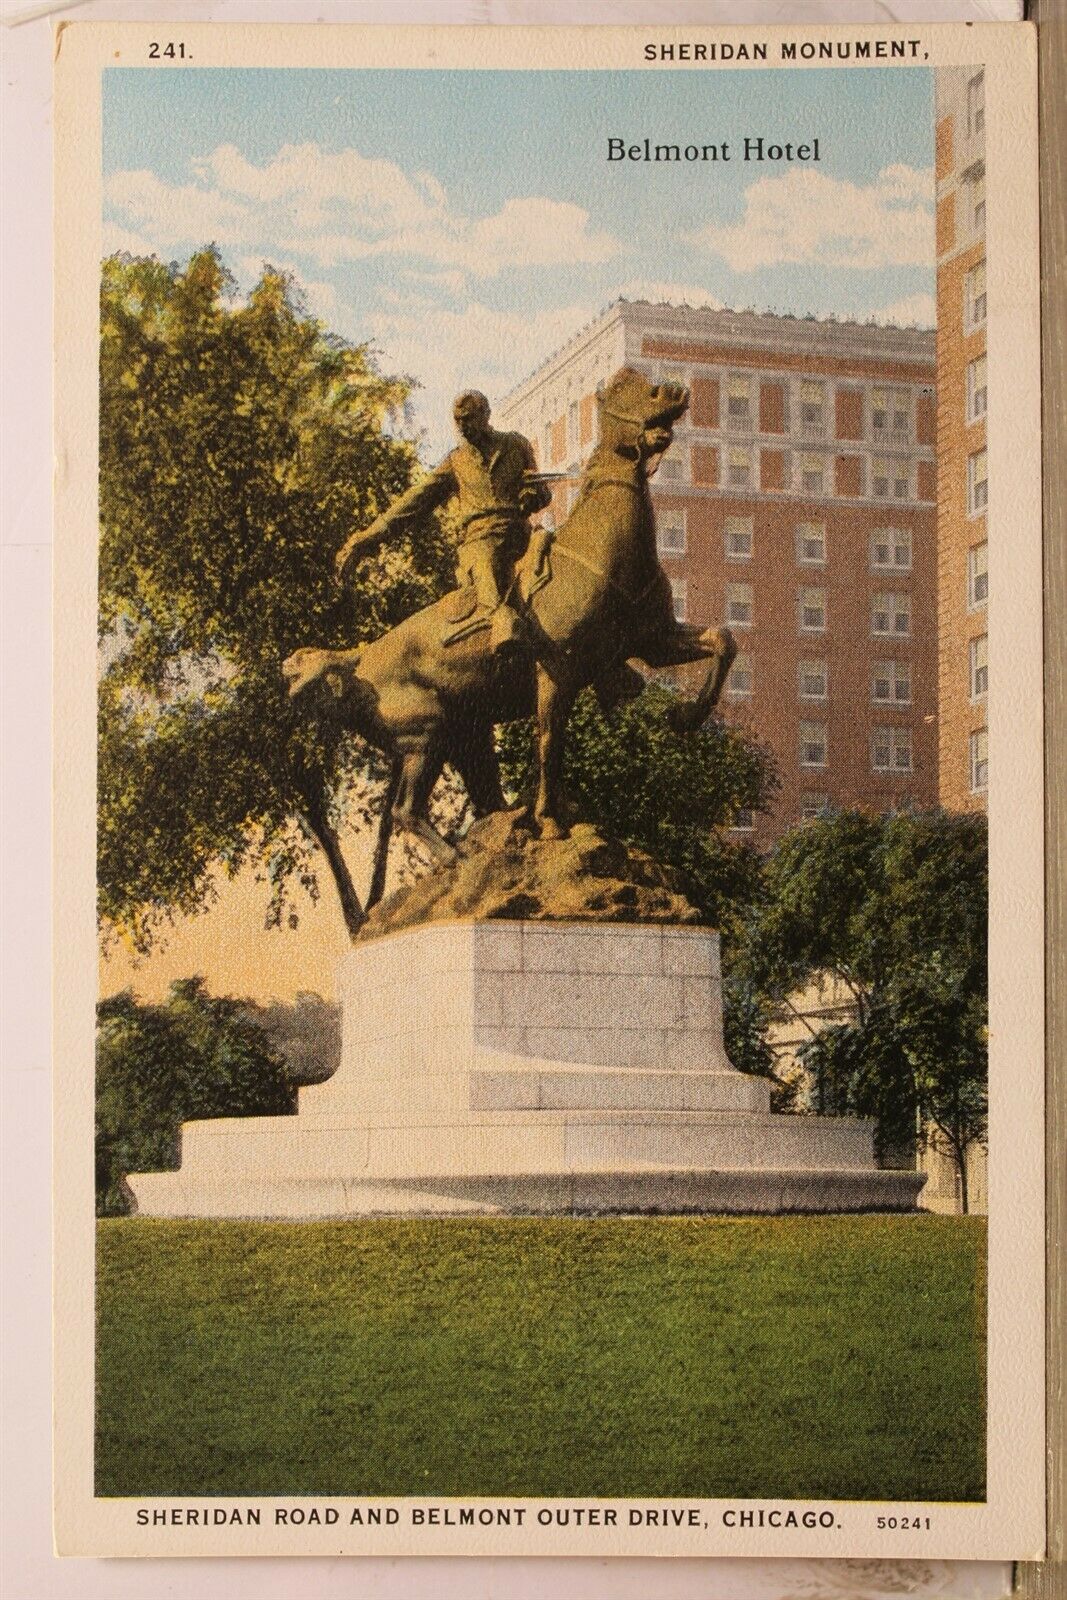 Illinois IL Chicago Sheridan Monument Road Belmont Outer Drive Postcard Old View